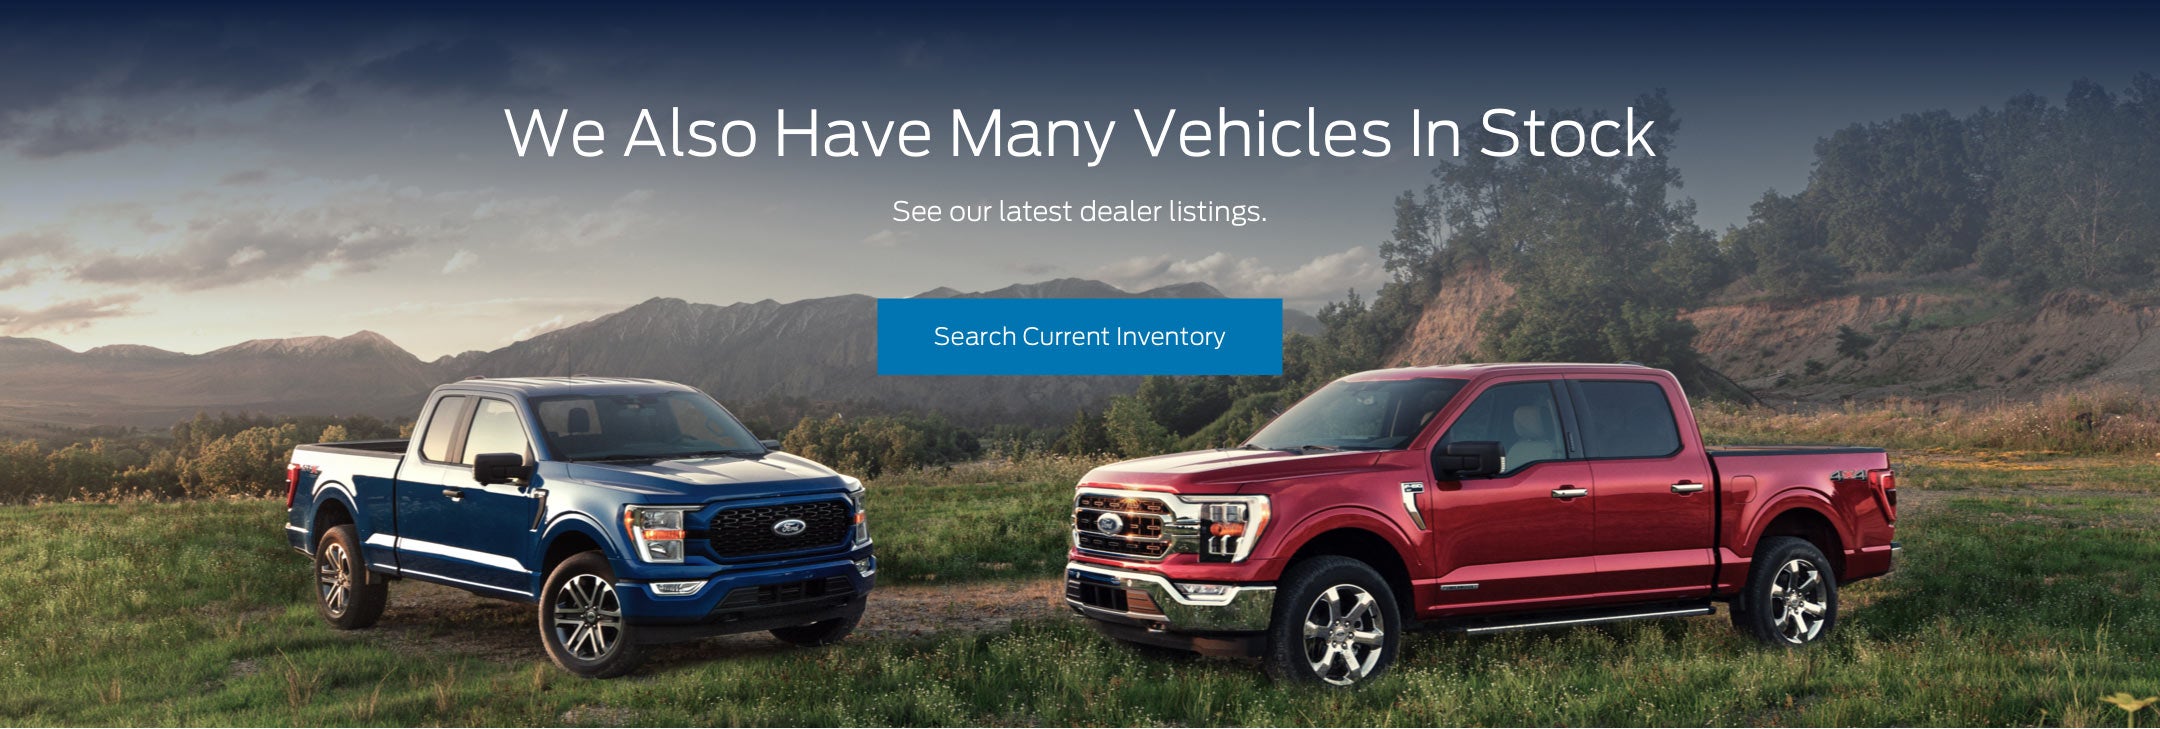 Ford vehicles in stock | Bob Maxey Ford (Detroit) in Detroit MI